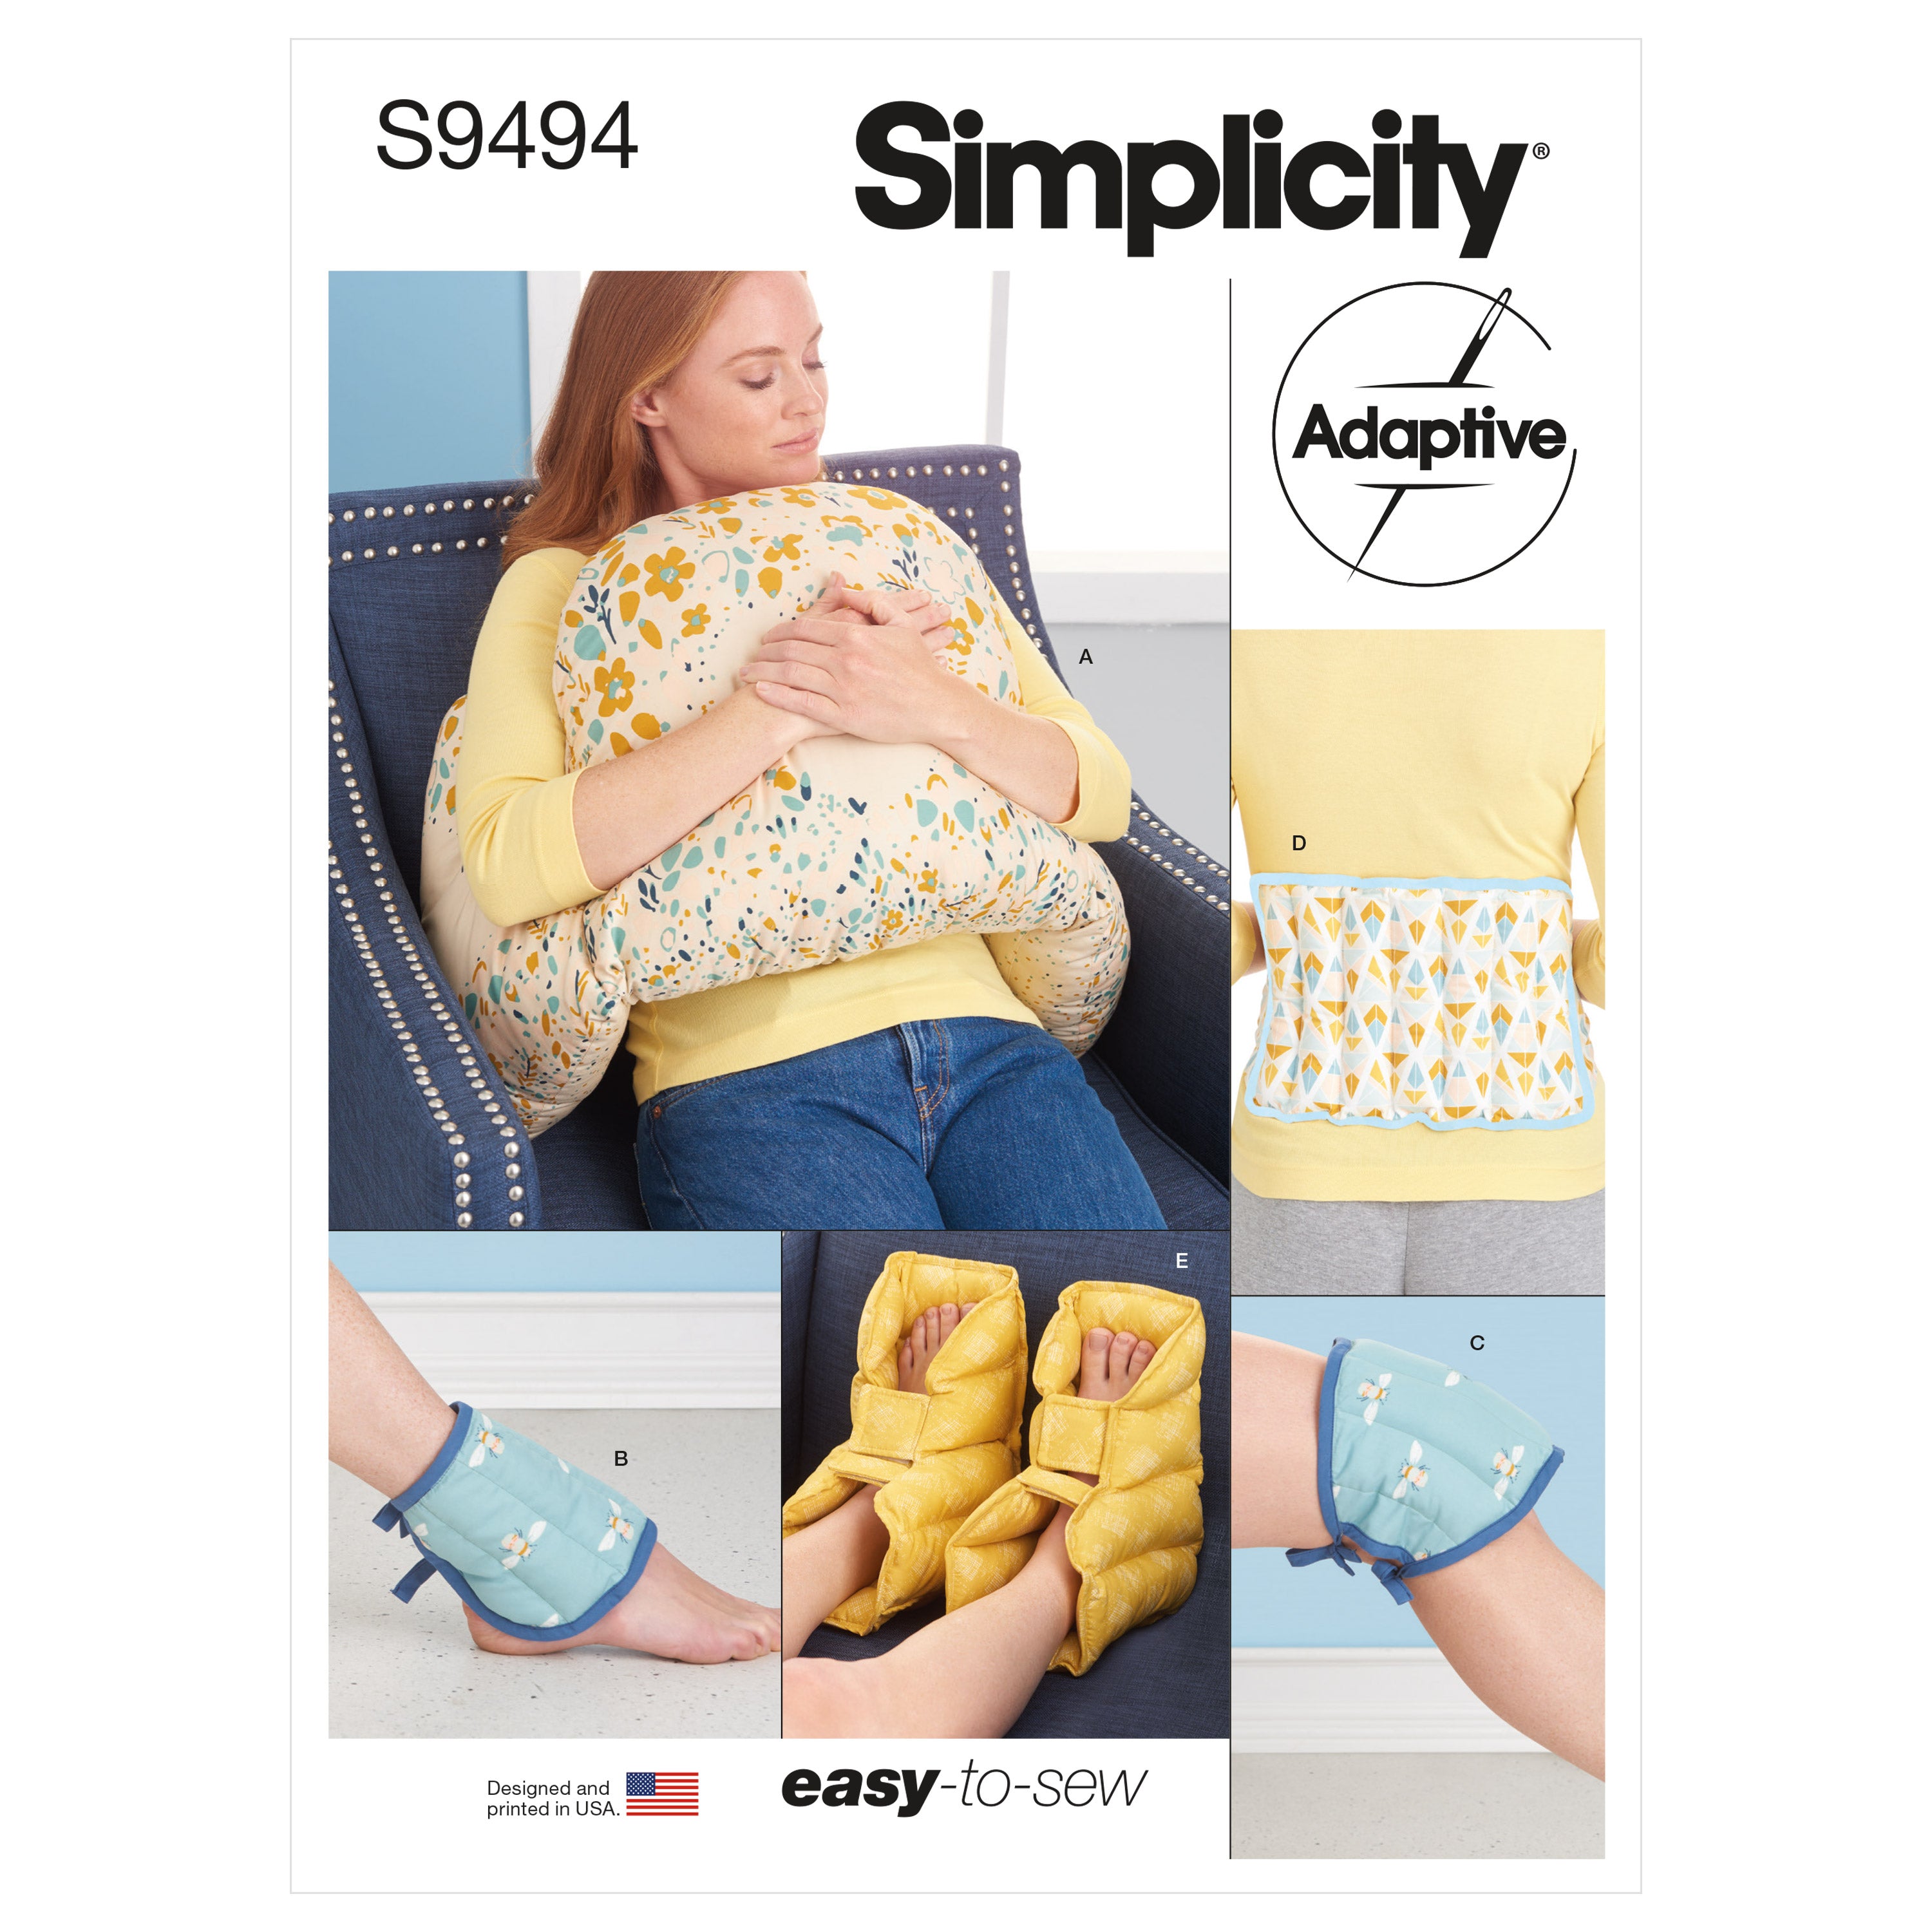 Simplicity Sewing Pattern 9494 Hot and Cold Comfort Packs from Jaycotts Sewing Supplies